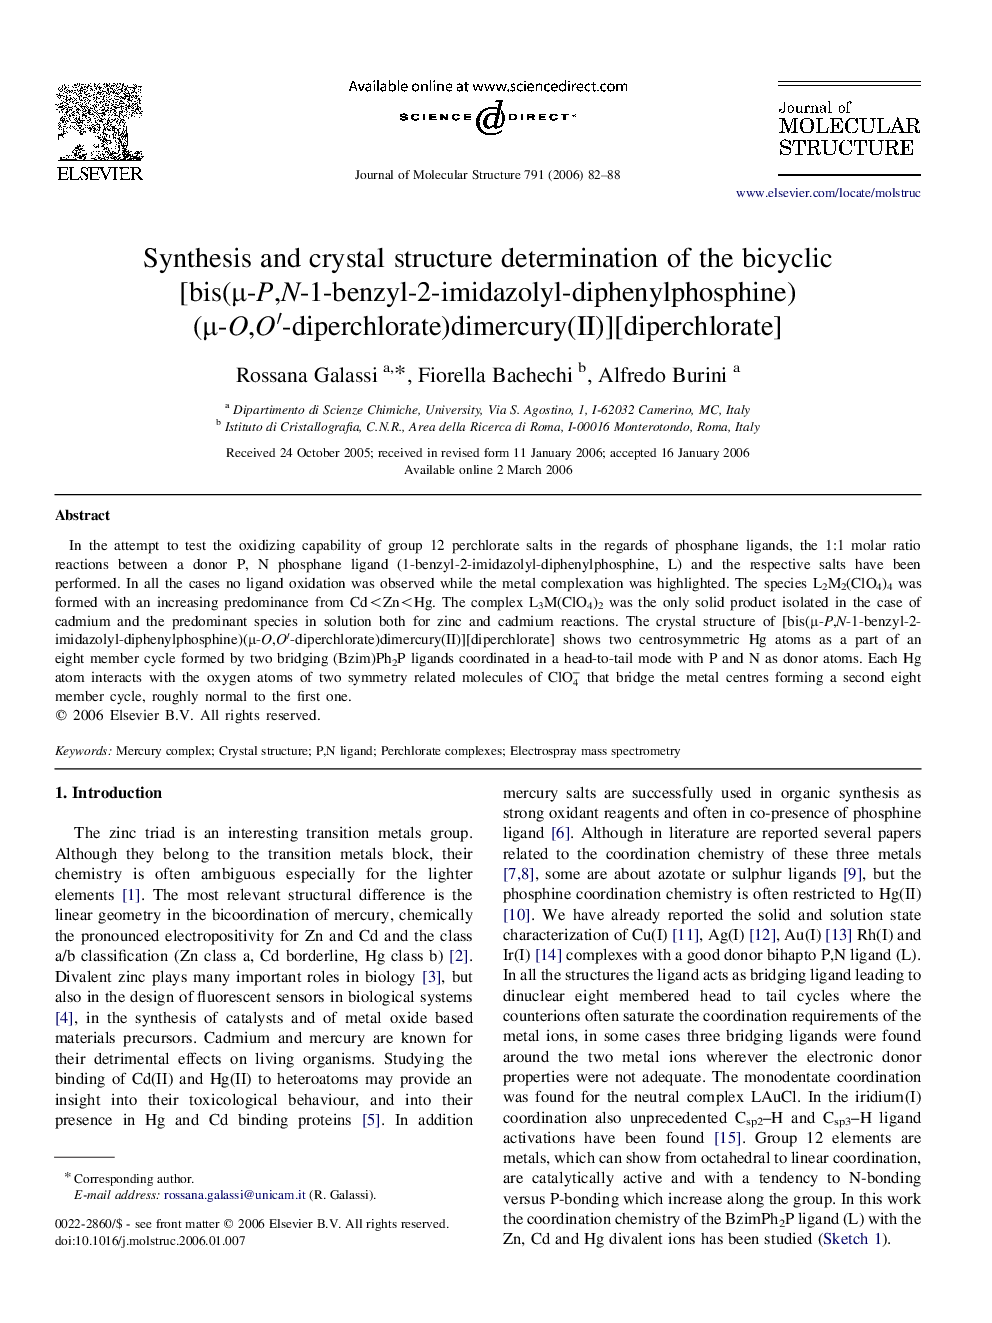 Synthesis and crystal structure determination of the bicyclic [bis(Î¼-P,N-1-benzyl-2-imidazolyl-diphenylphosphine) (Î¼-O,Oâ²-diperchlorate)dimercury(II)][diperchlorate]